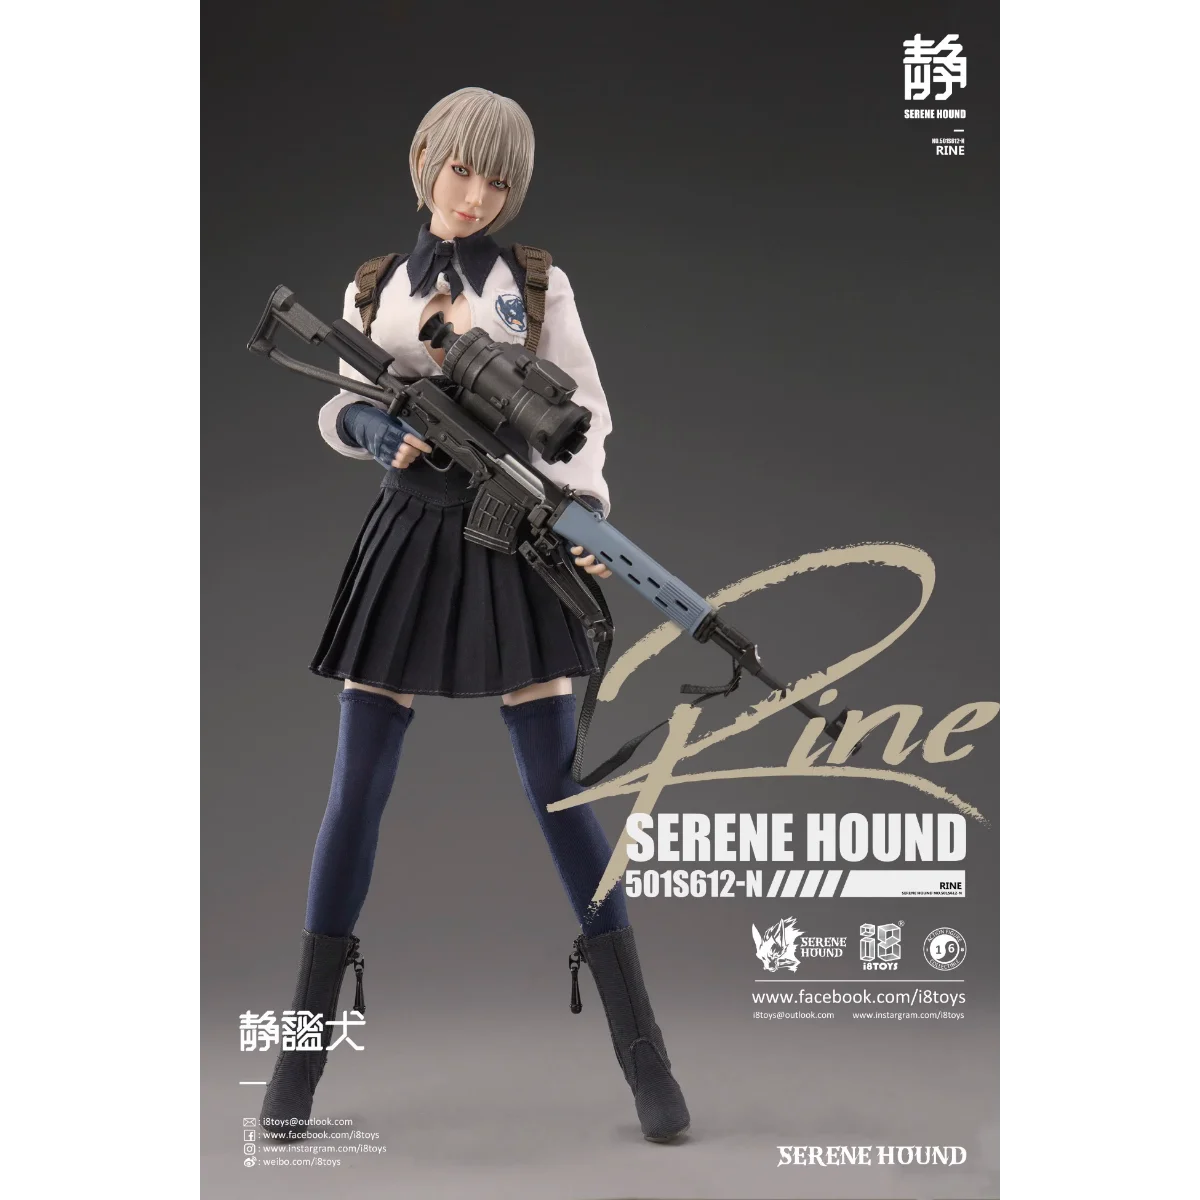 https://ae01.alicdn.com/kf/Sa30d7f84a87243d48144bb7bd248a8add/In-Stock-Original-I8-Toys-501S612-SERENE-HOUND-Rine-TACHE-Female-Soldier-Action-Models-Art-Collections.jpg